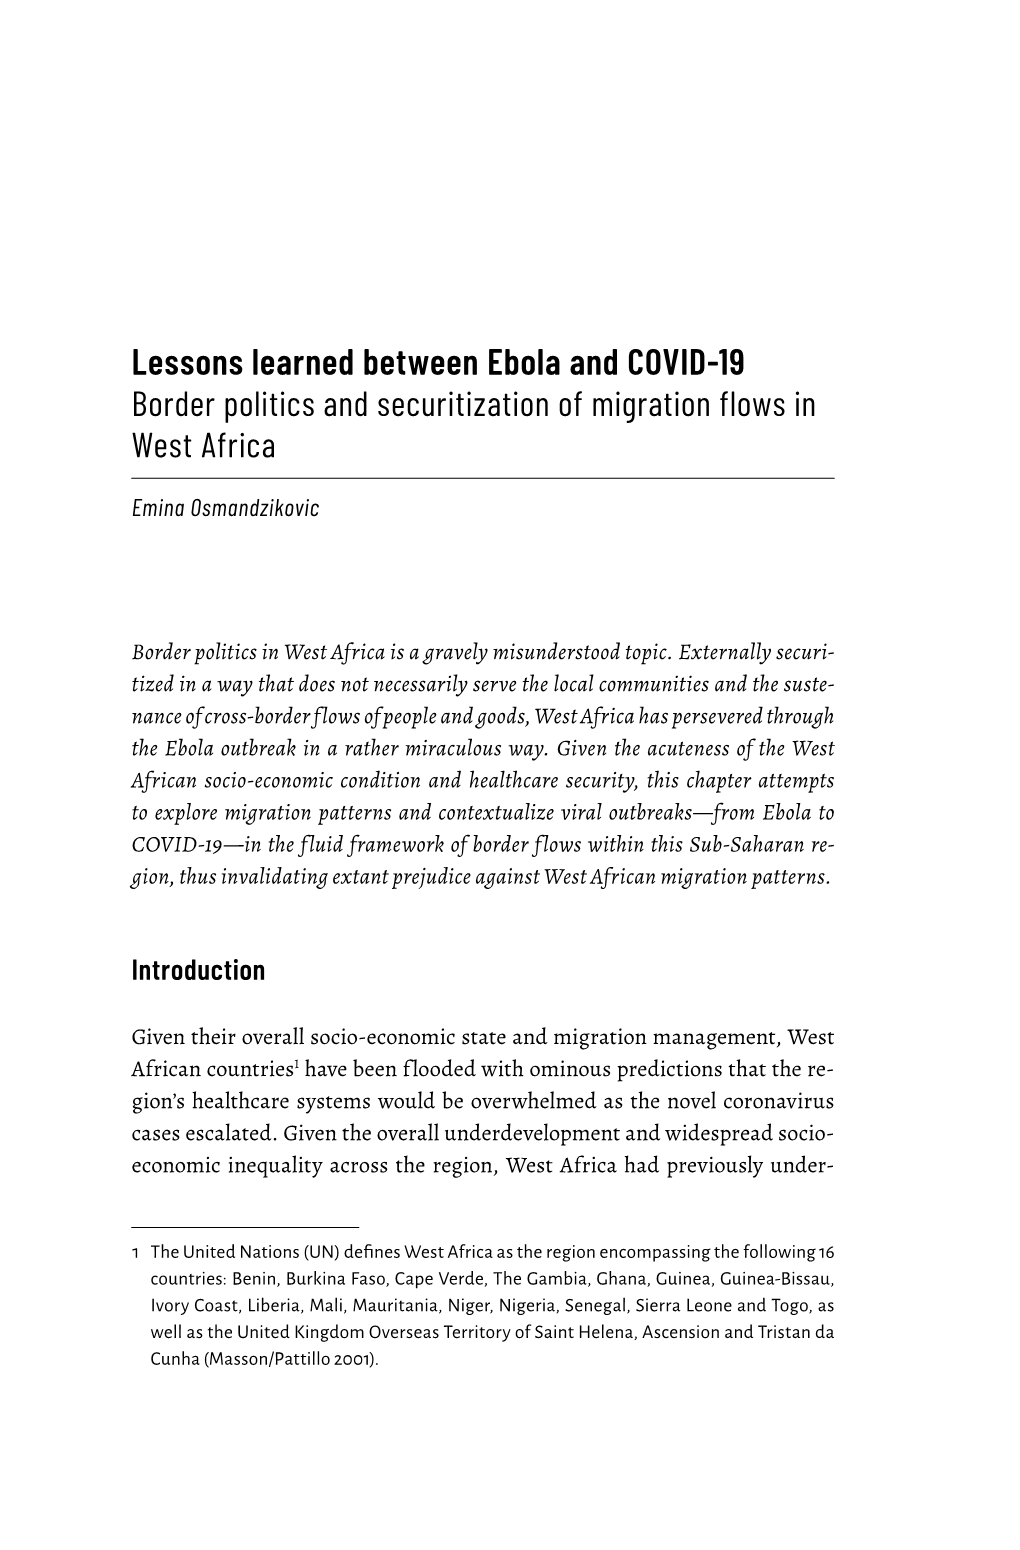 Lessons Learned Between Ebola and COVID-19 Border Politics and Securitization of Migration Flows in West Africa